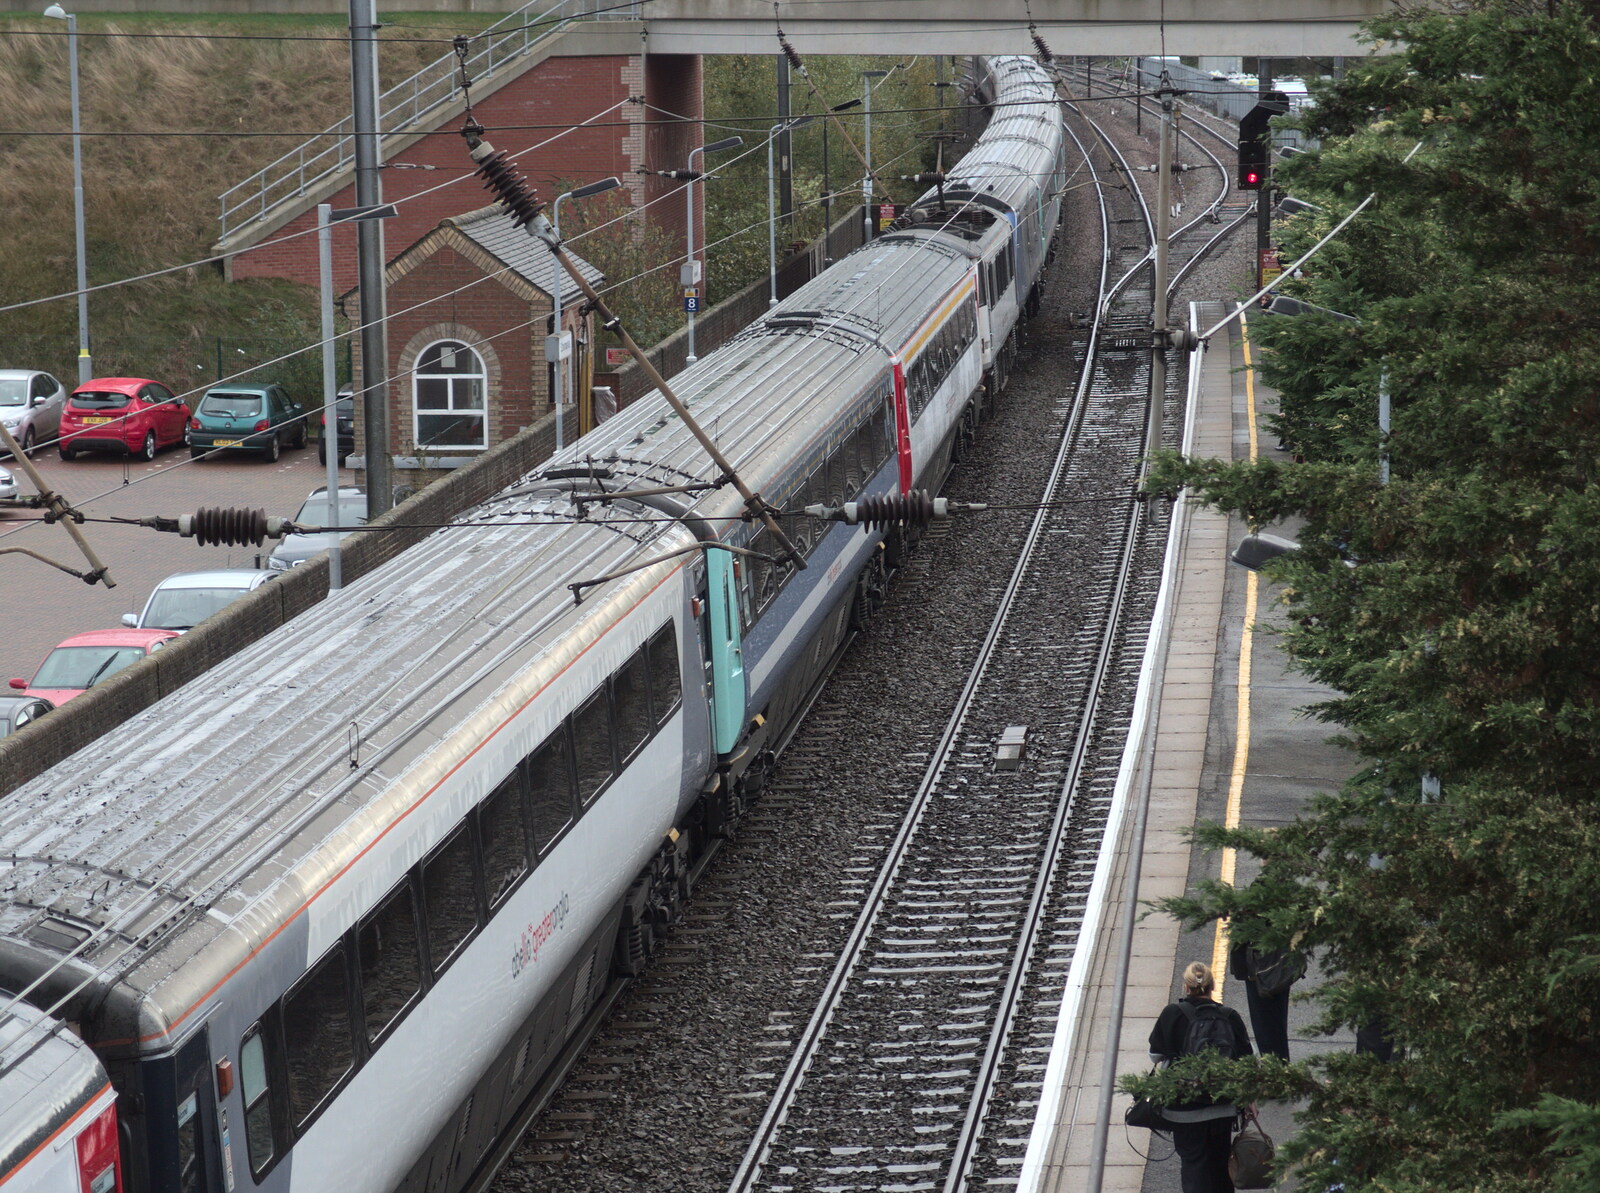 Another view of the long train from (Very) Long Train (Not) Running, Stowmarket, Suffolk - 21st October 2014